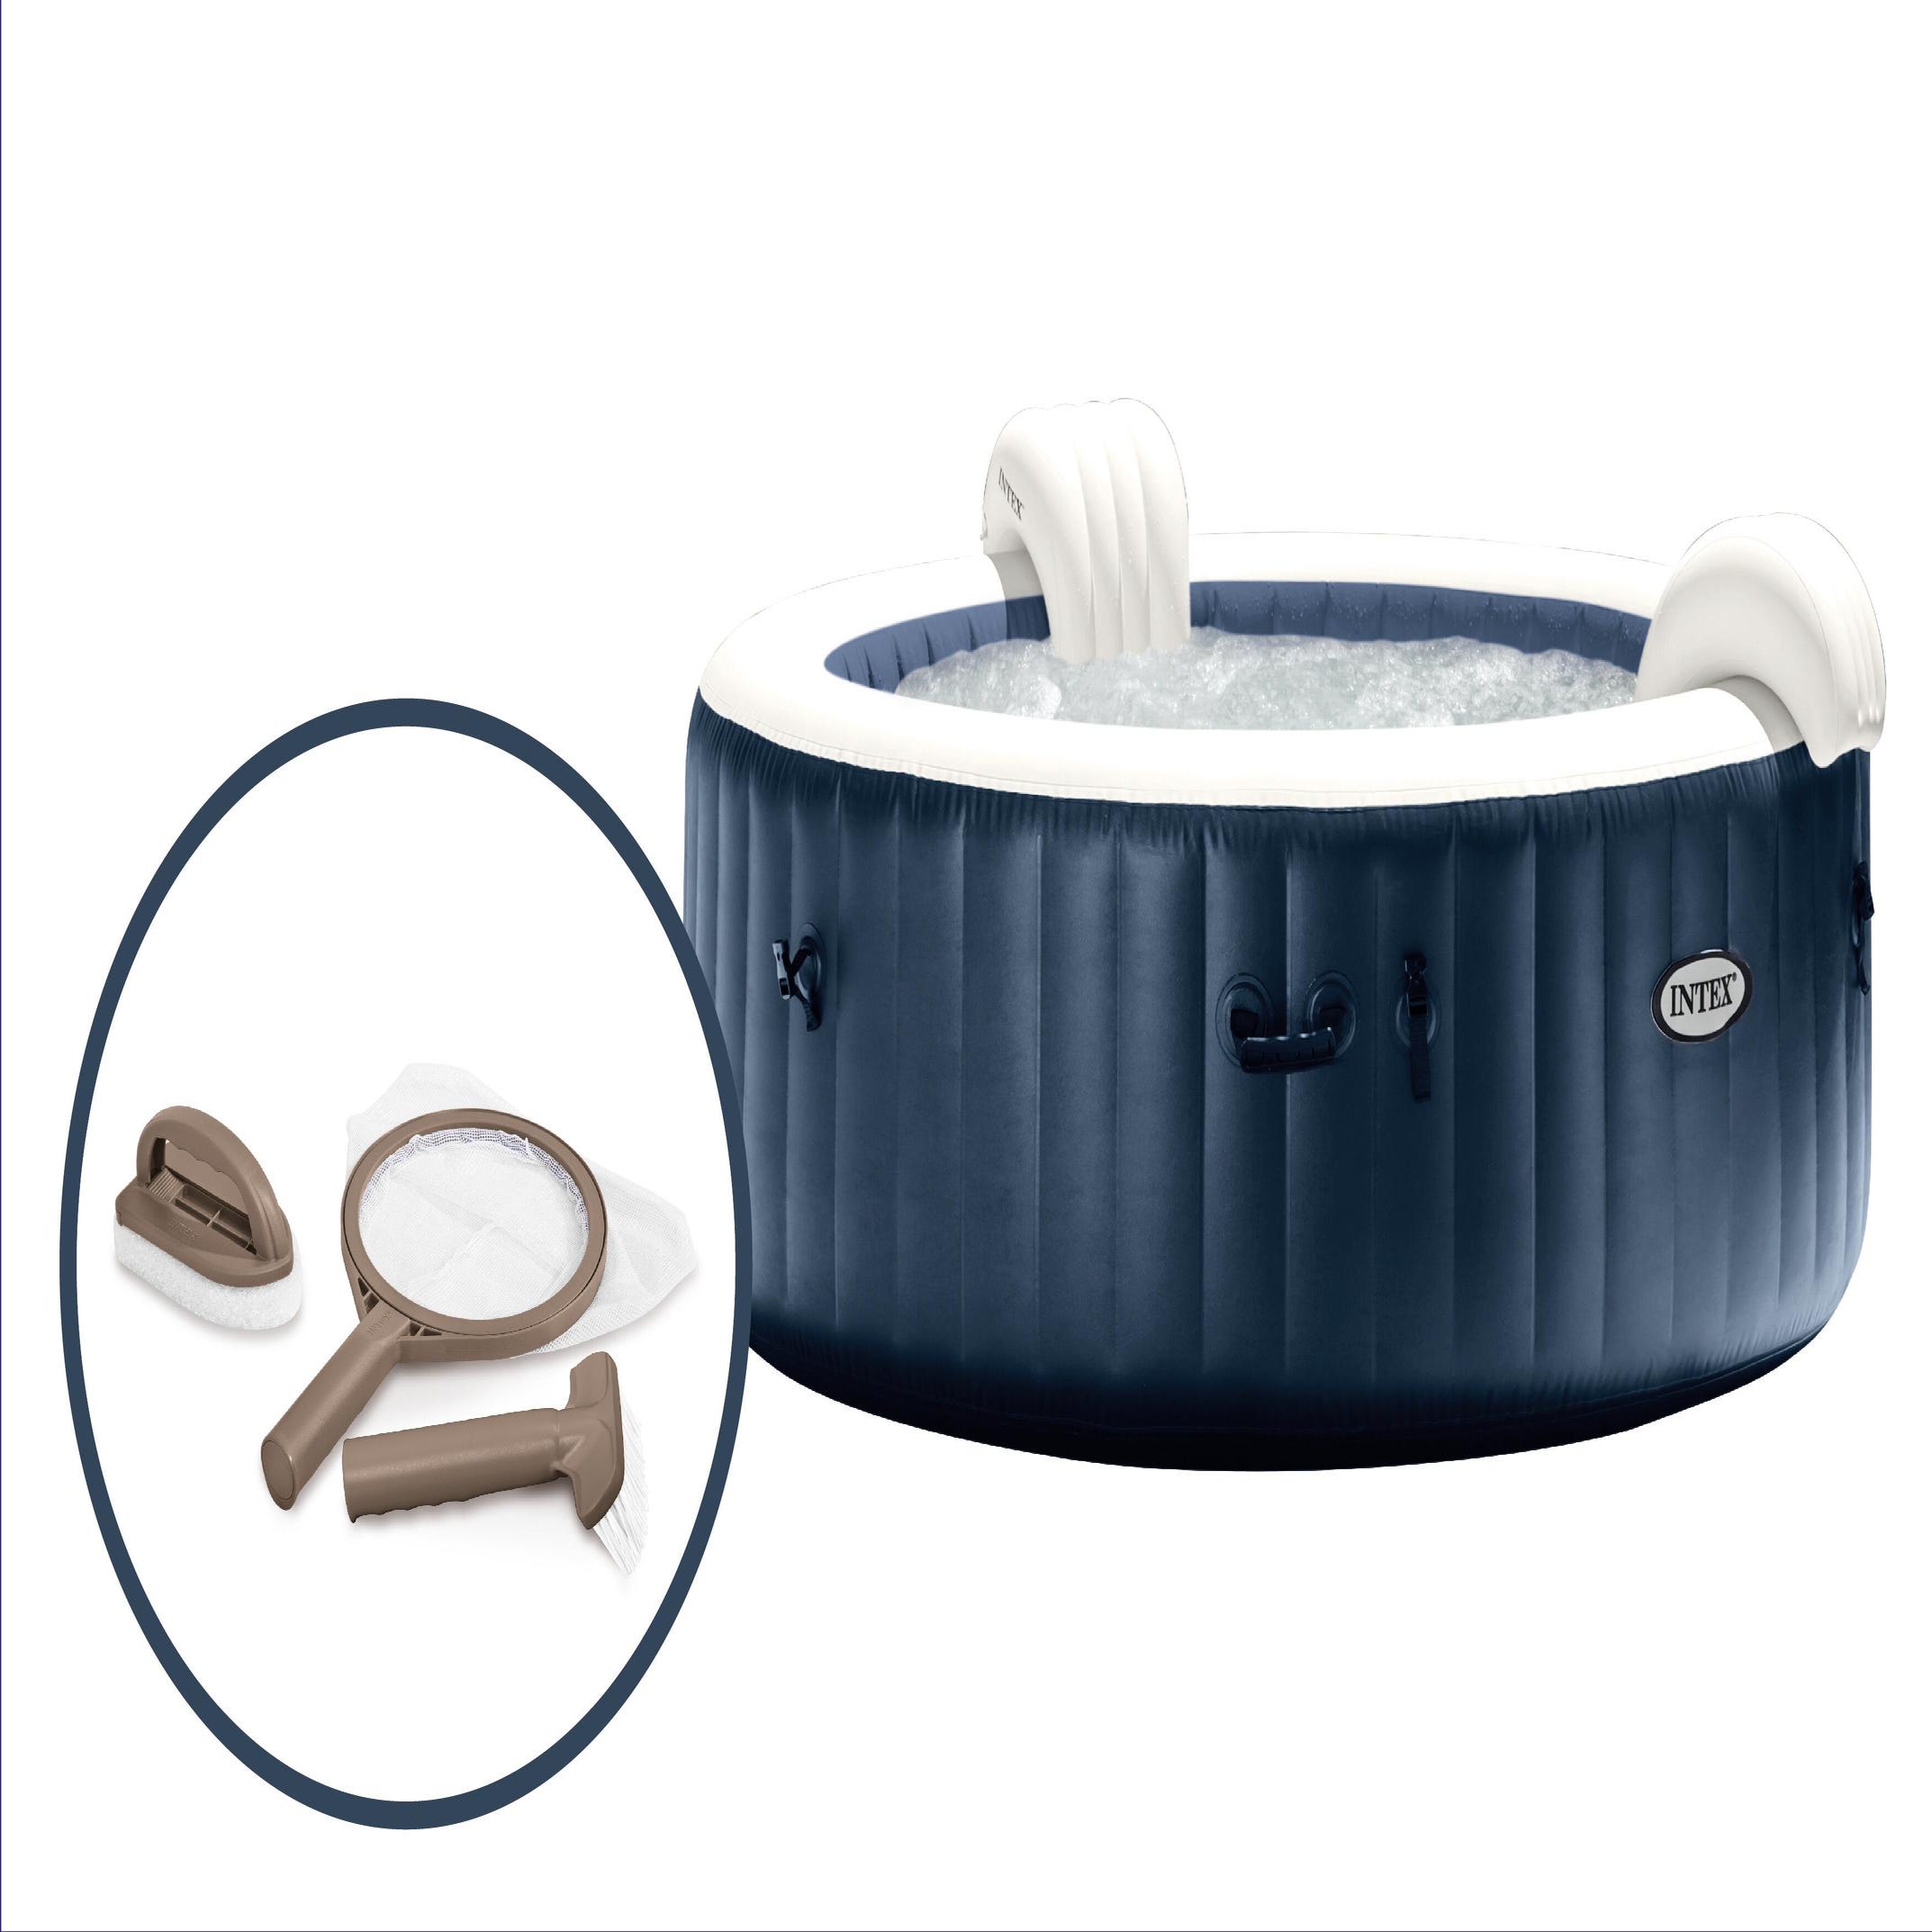 Pure Spa gonflable INTEX Baltik rond 4 places, Leroy Merlin